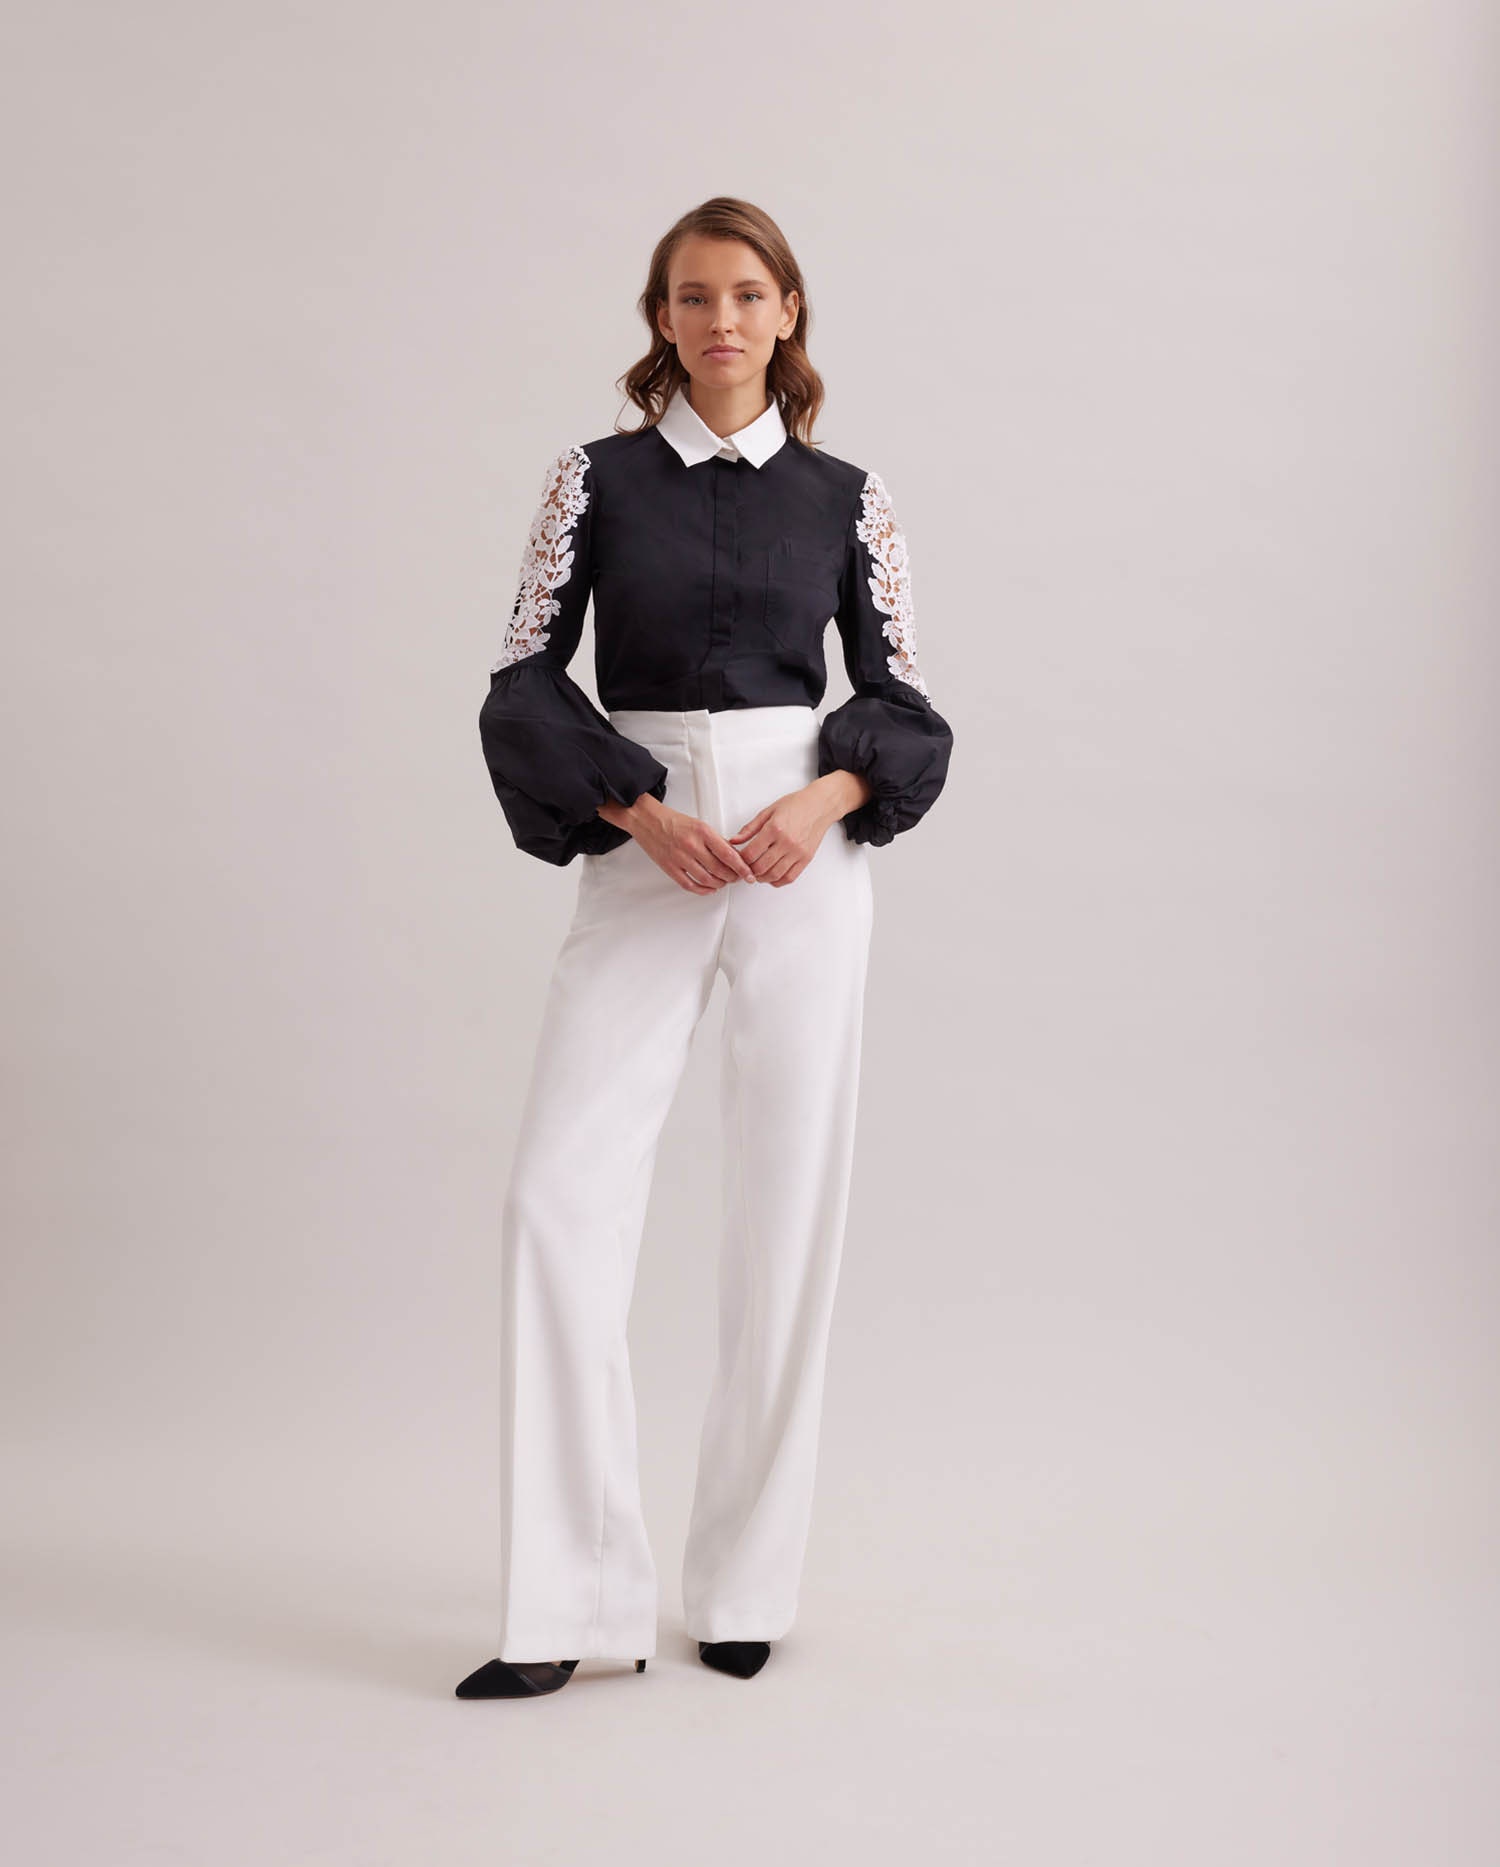 Discover The LAORA black balloon sleeve shirt with intricate floral embroidery from ANNE FONTAINE